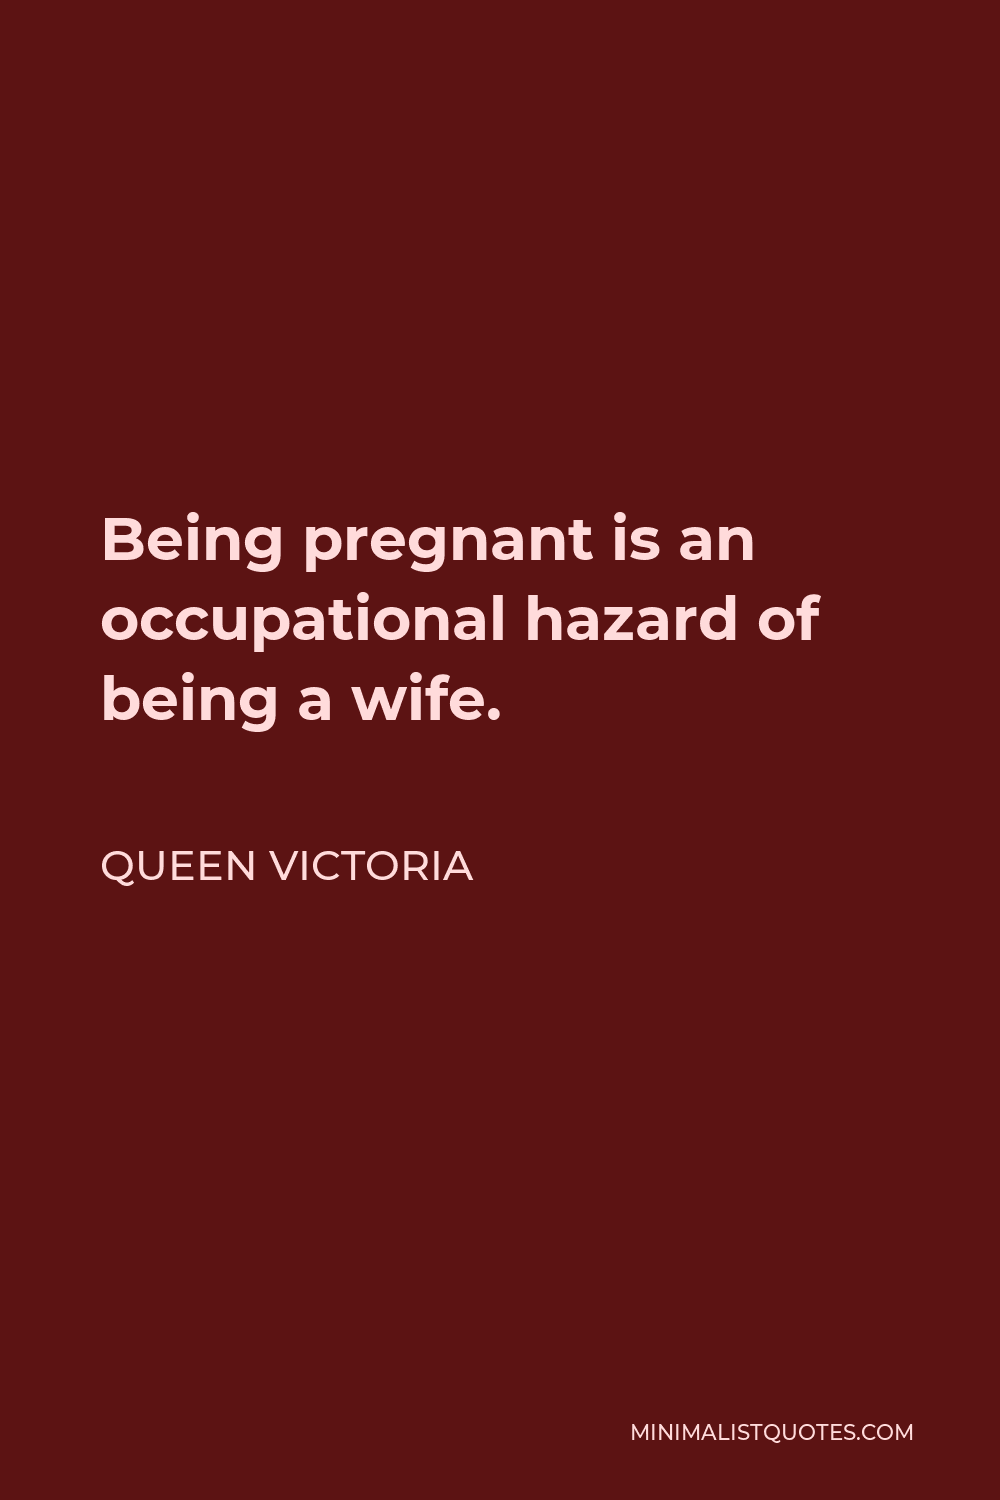 Queen Victoria Quote - Being pregnant is an occupational hazard of being a wife.